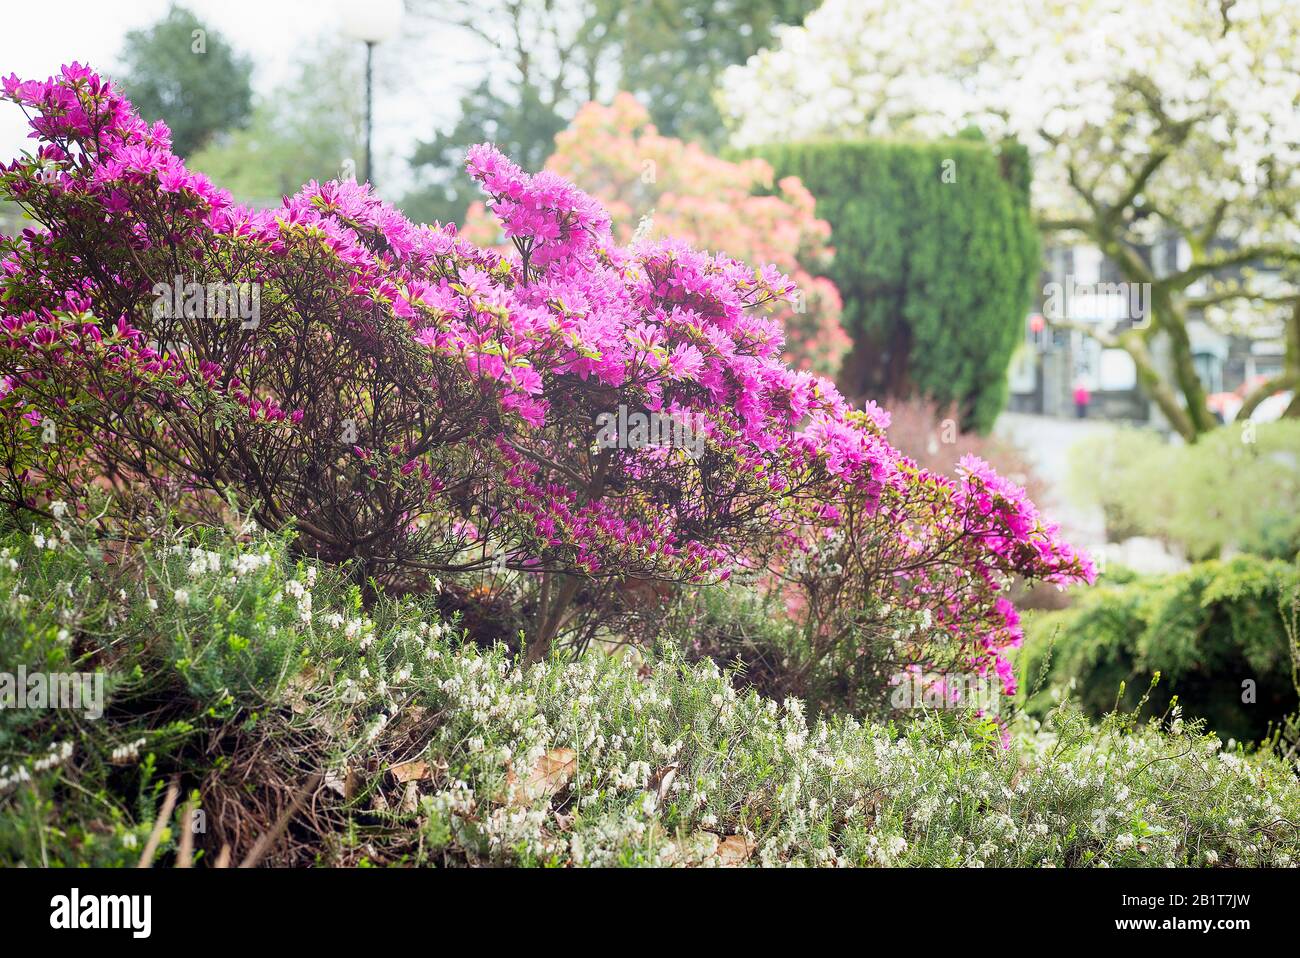 A beautiful all-weaather Cumbrian urban garden in Ambleside Cumbria England UK, an important visitor attraction in the English Lake District Magenta p Stock Photo